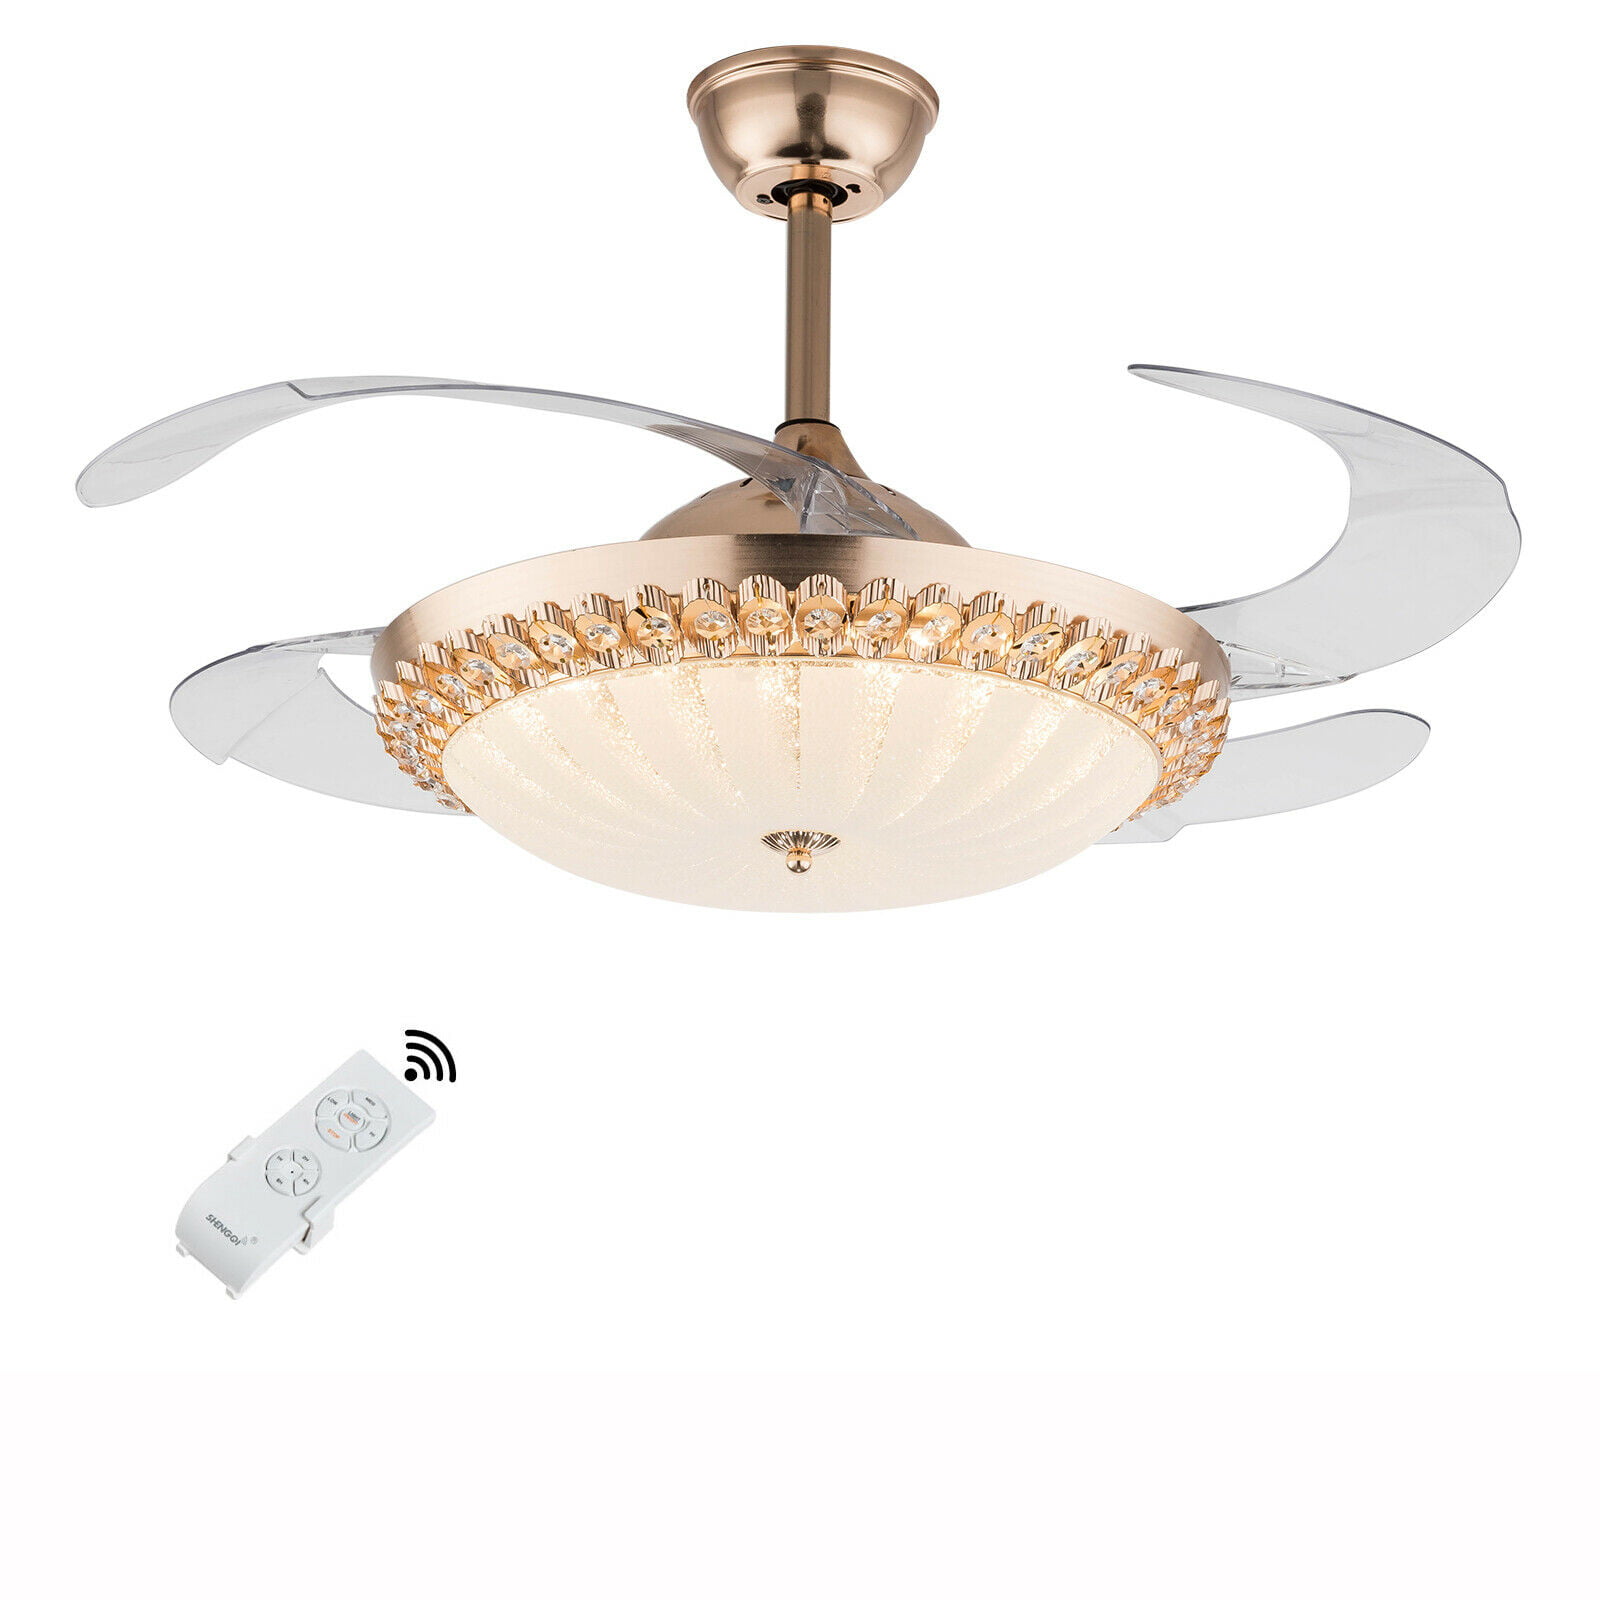 42"Gold Crystal Ceiling Fan Light LED Chandelier Remote Control Invisible Blades 